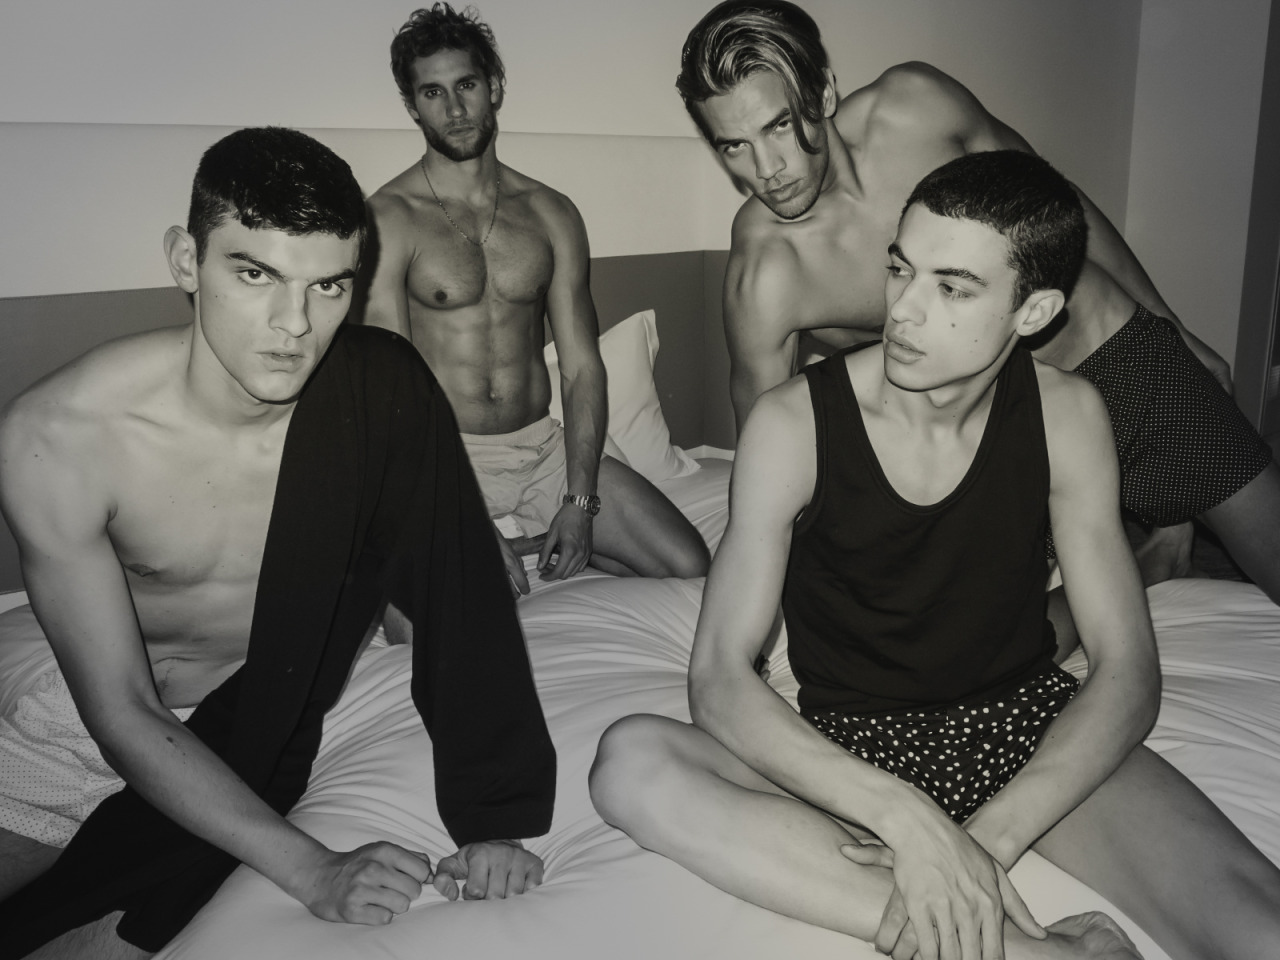 Photography by Joseph Lally. Styling by Julien Sauvalle. Fashion assistant: Dennis Hinzmann. Models: Malik Winslow at Major Model Management. Corey Marsau, Daniel McSweeney, and Franco Noriega at Q Models NYC.